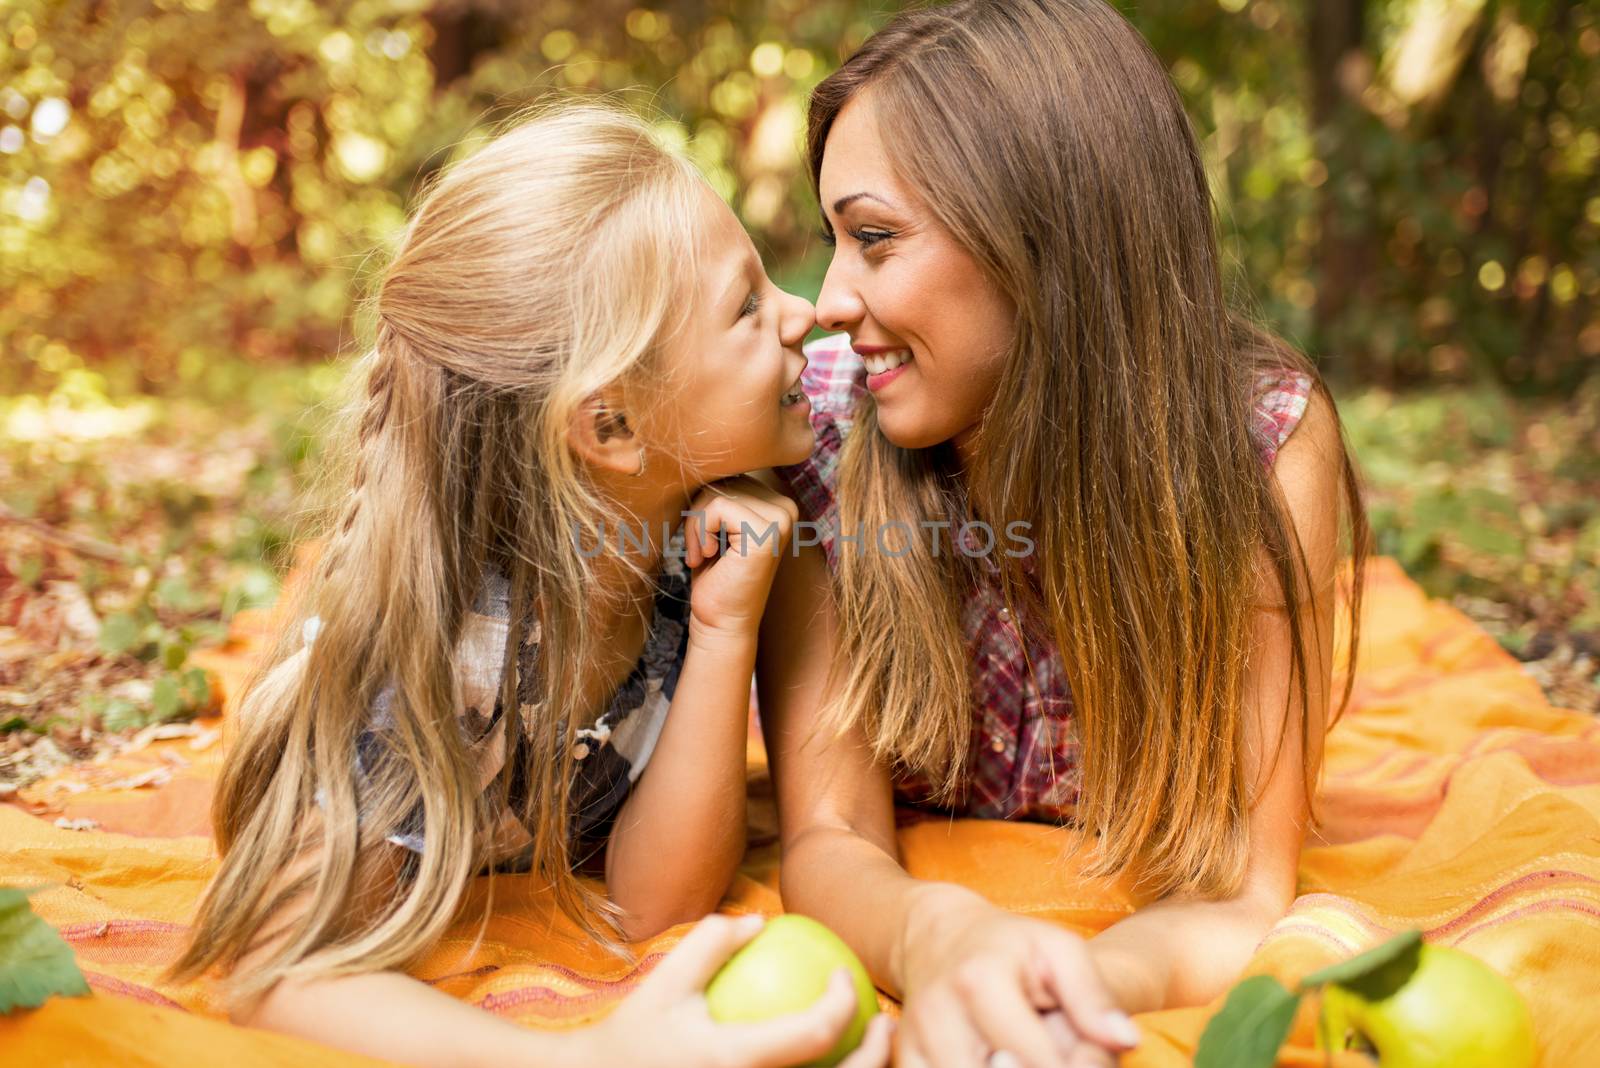 It's the autumn season and beautiful mom and her little girl is lying in a forest full of autumn leaves and enjoying. 